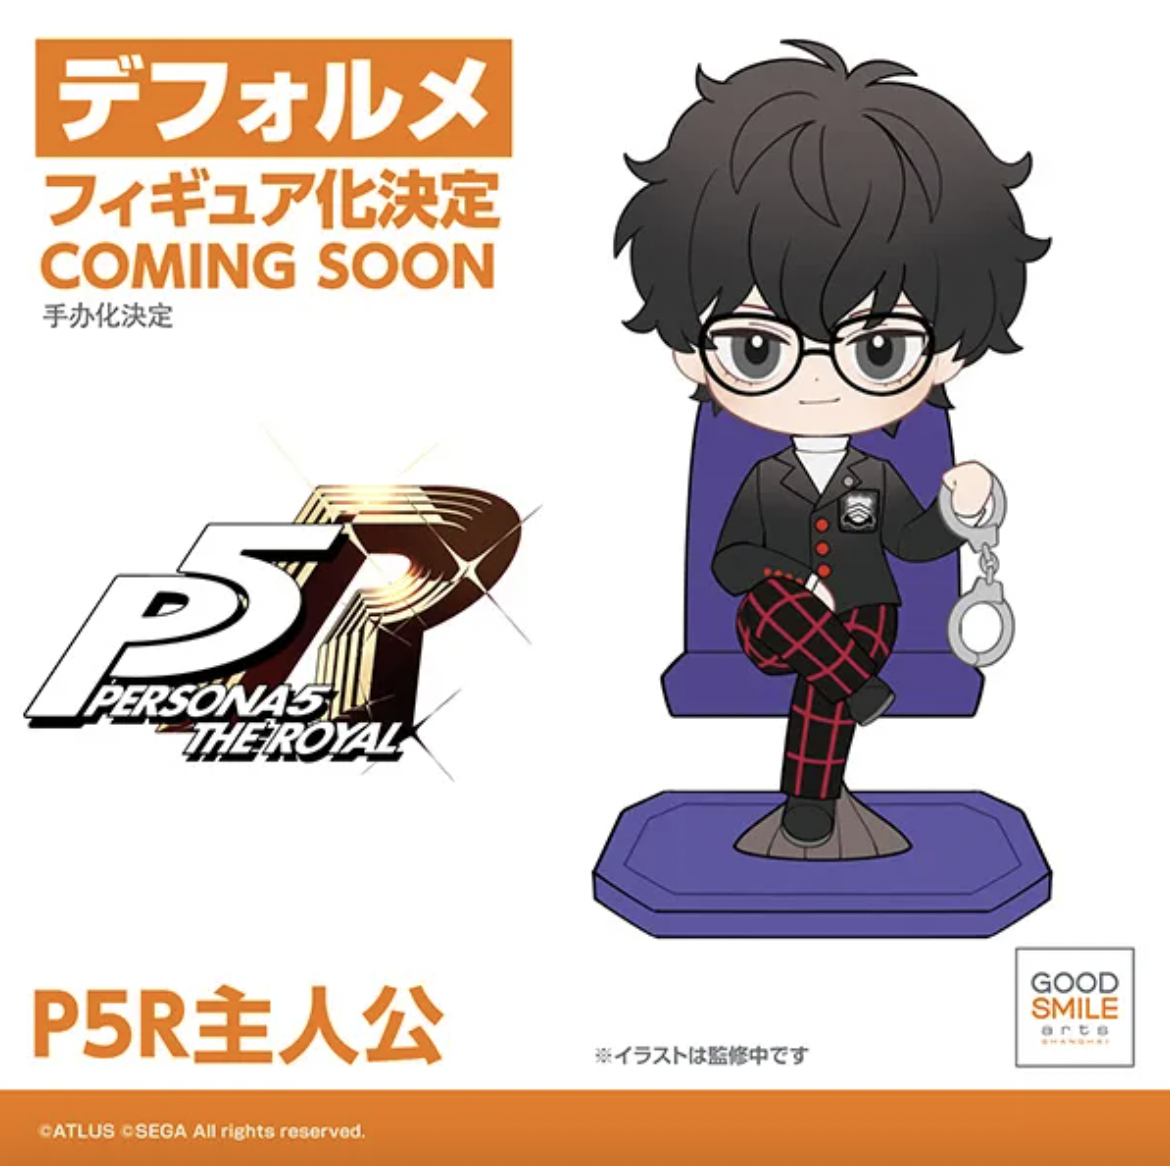 New Persona 3, 4, and 5 Figures Announced